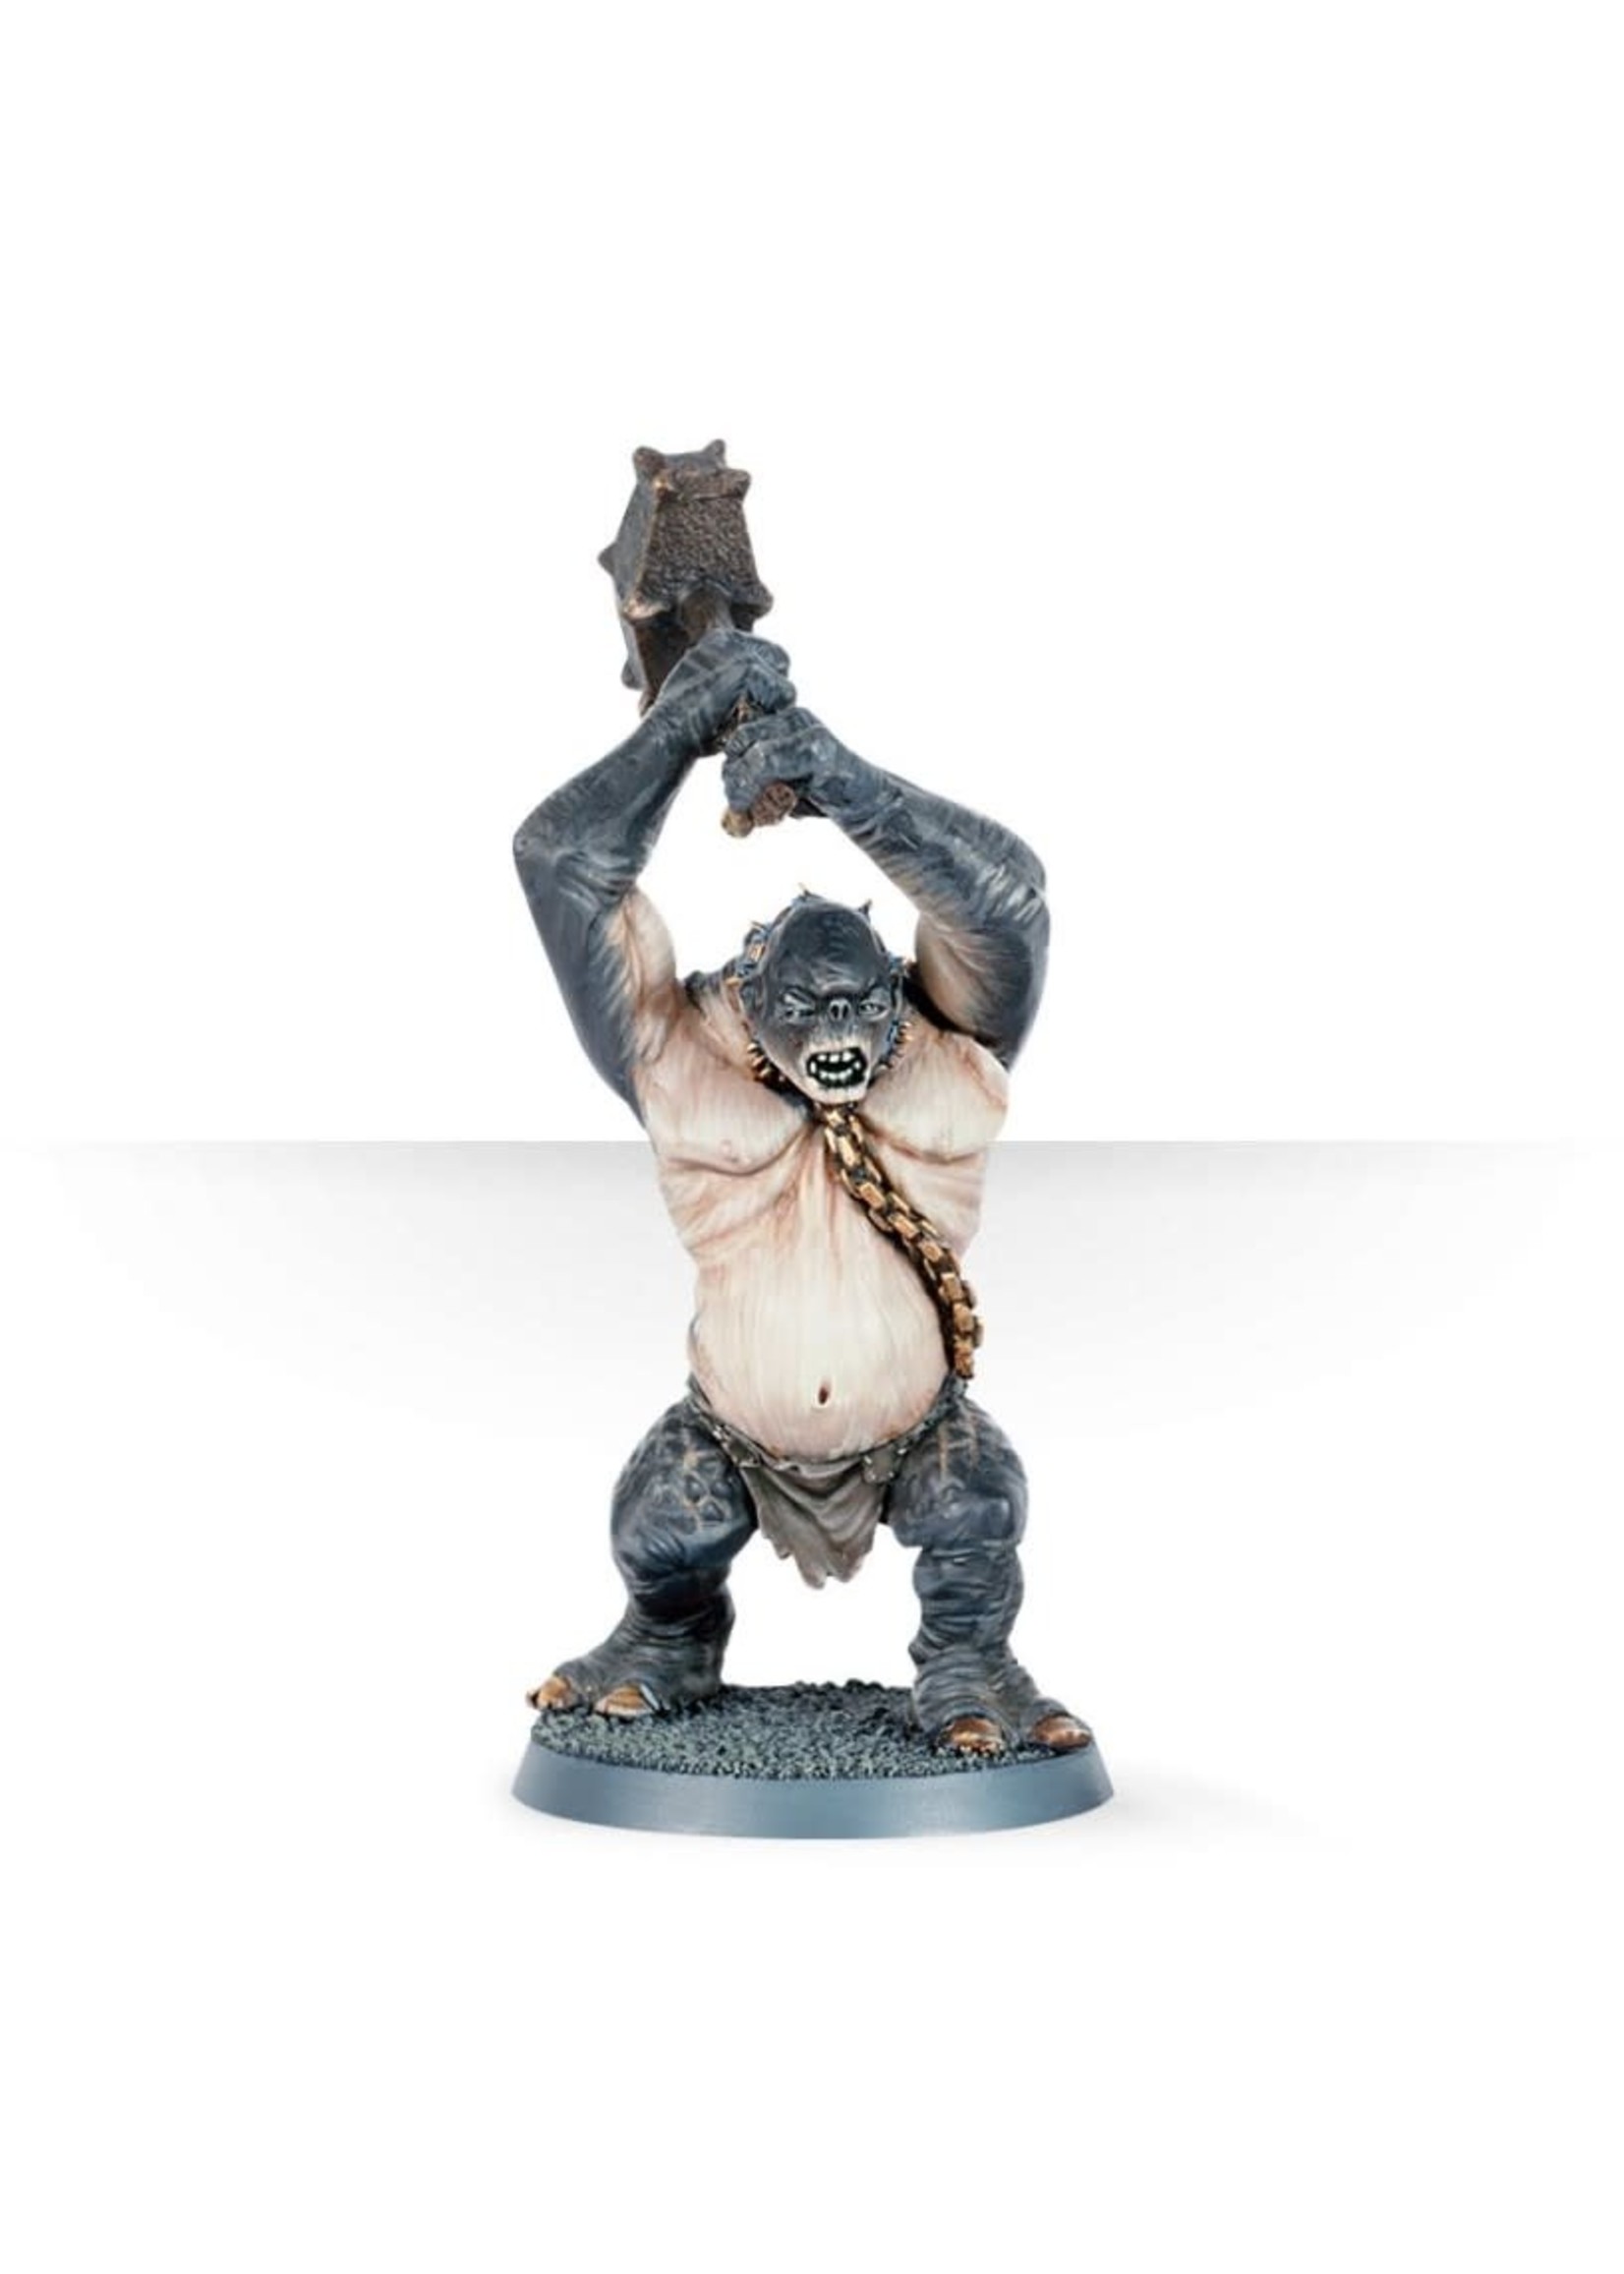 Games Workshop Cave Troll of Moria - The Lord of the Rings - Middle-Earth Strategy Battle Game